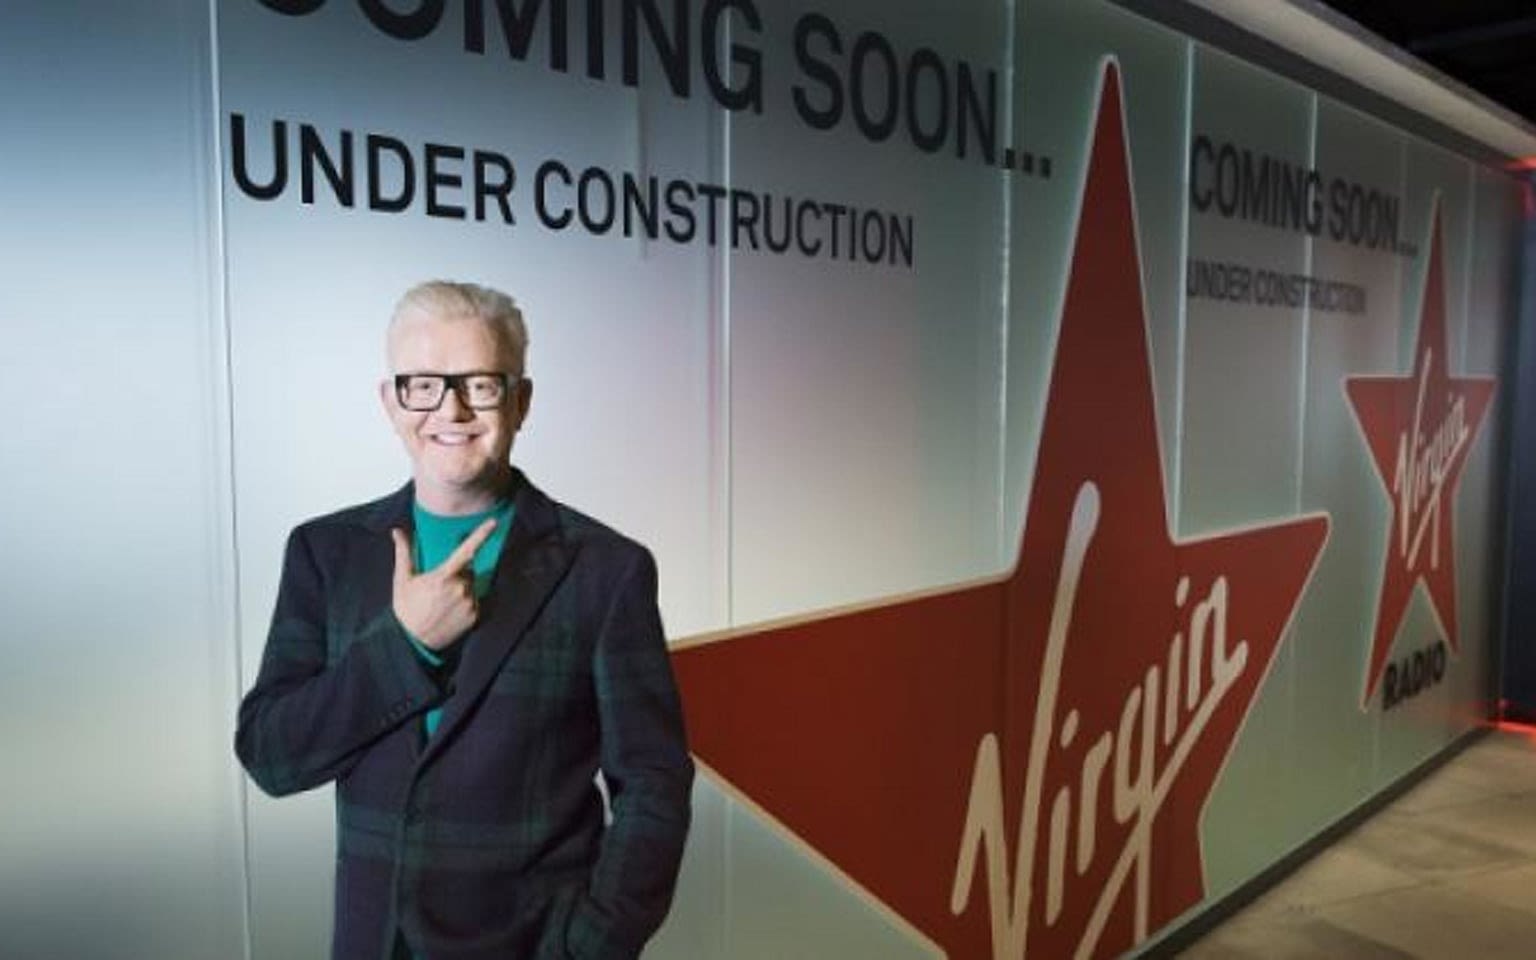 An advert for the Chris Evans Breakfast Show on Virgin Radio, which reads Coming Soon... Under Construction